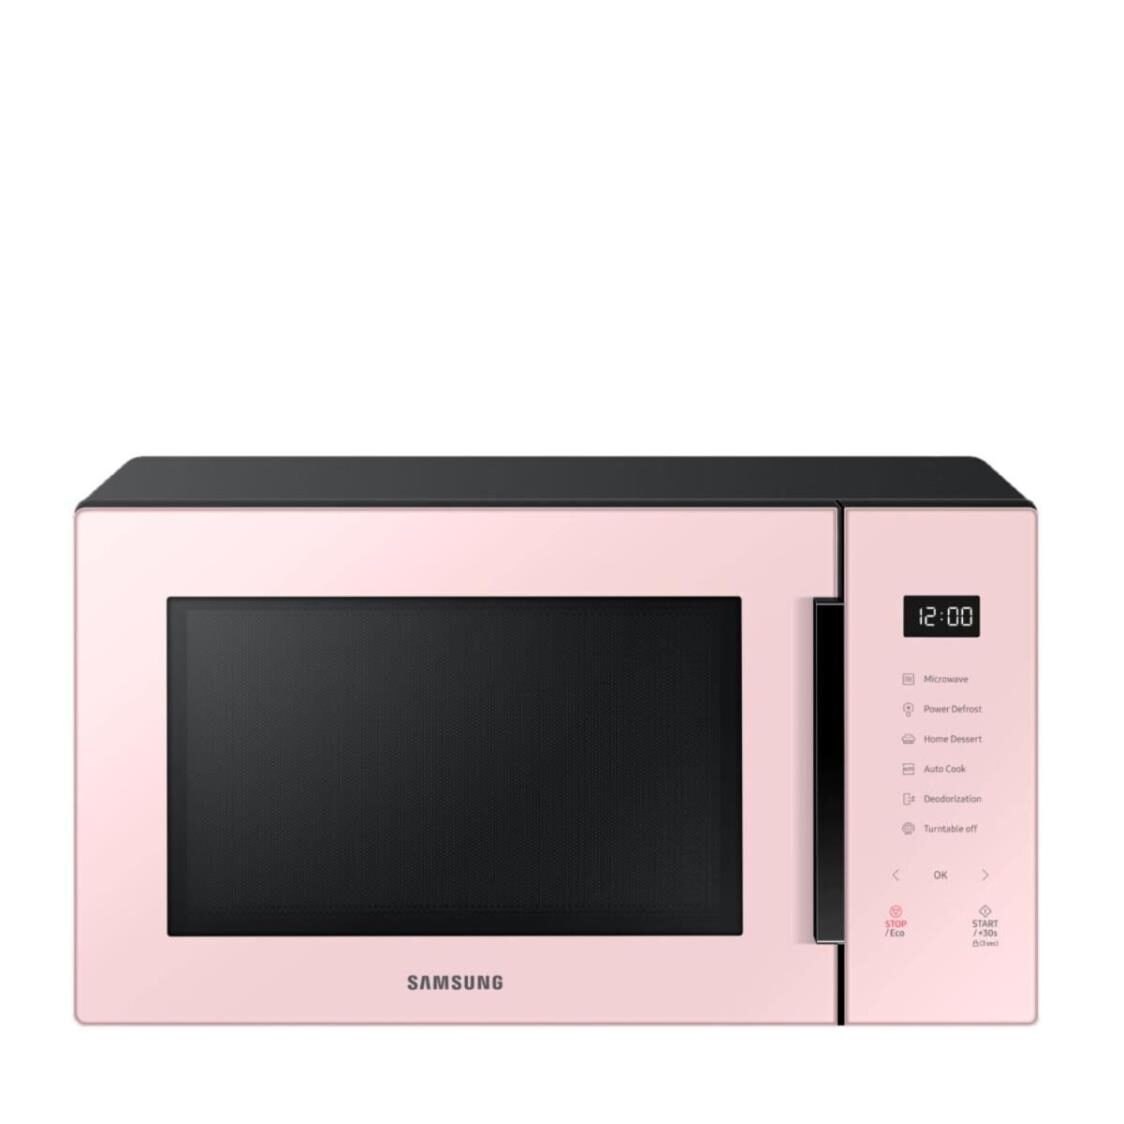 Samsung 30L Solo Microwave Oven with Home Dessert MS30T5018APSP